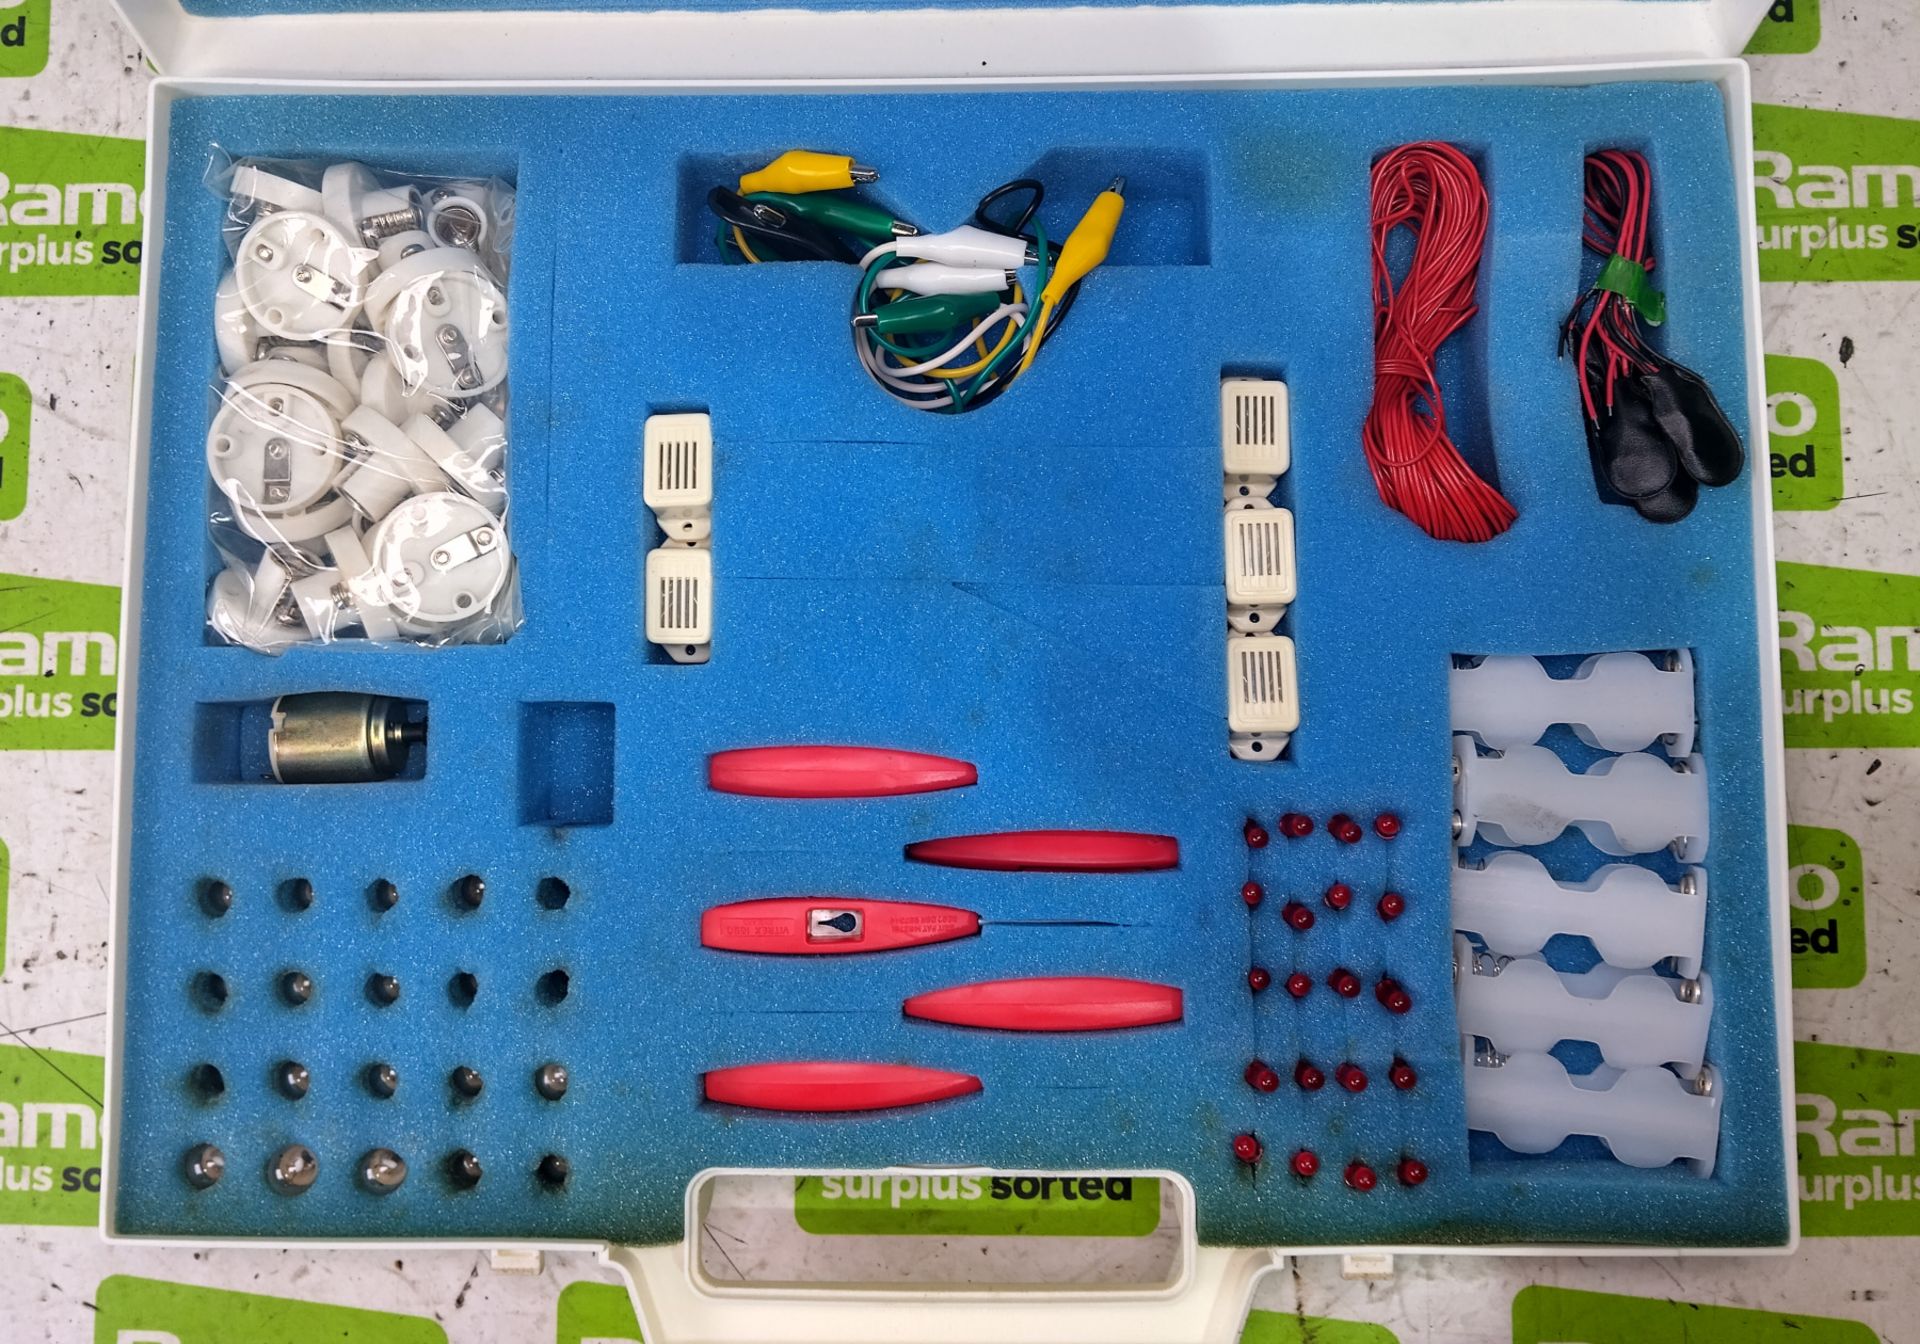 Southern Electric - The Electric Box - electronics kit for schools - Image 4 of 4